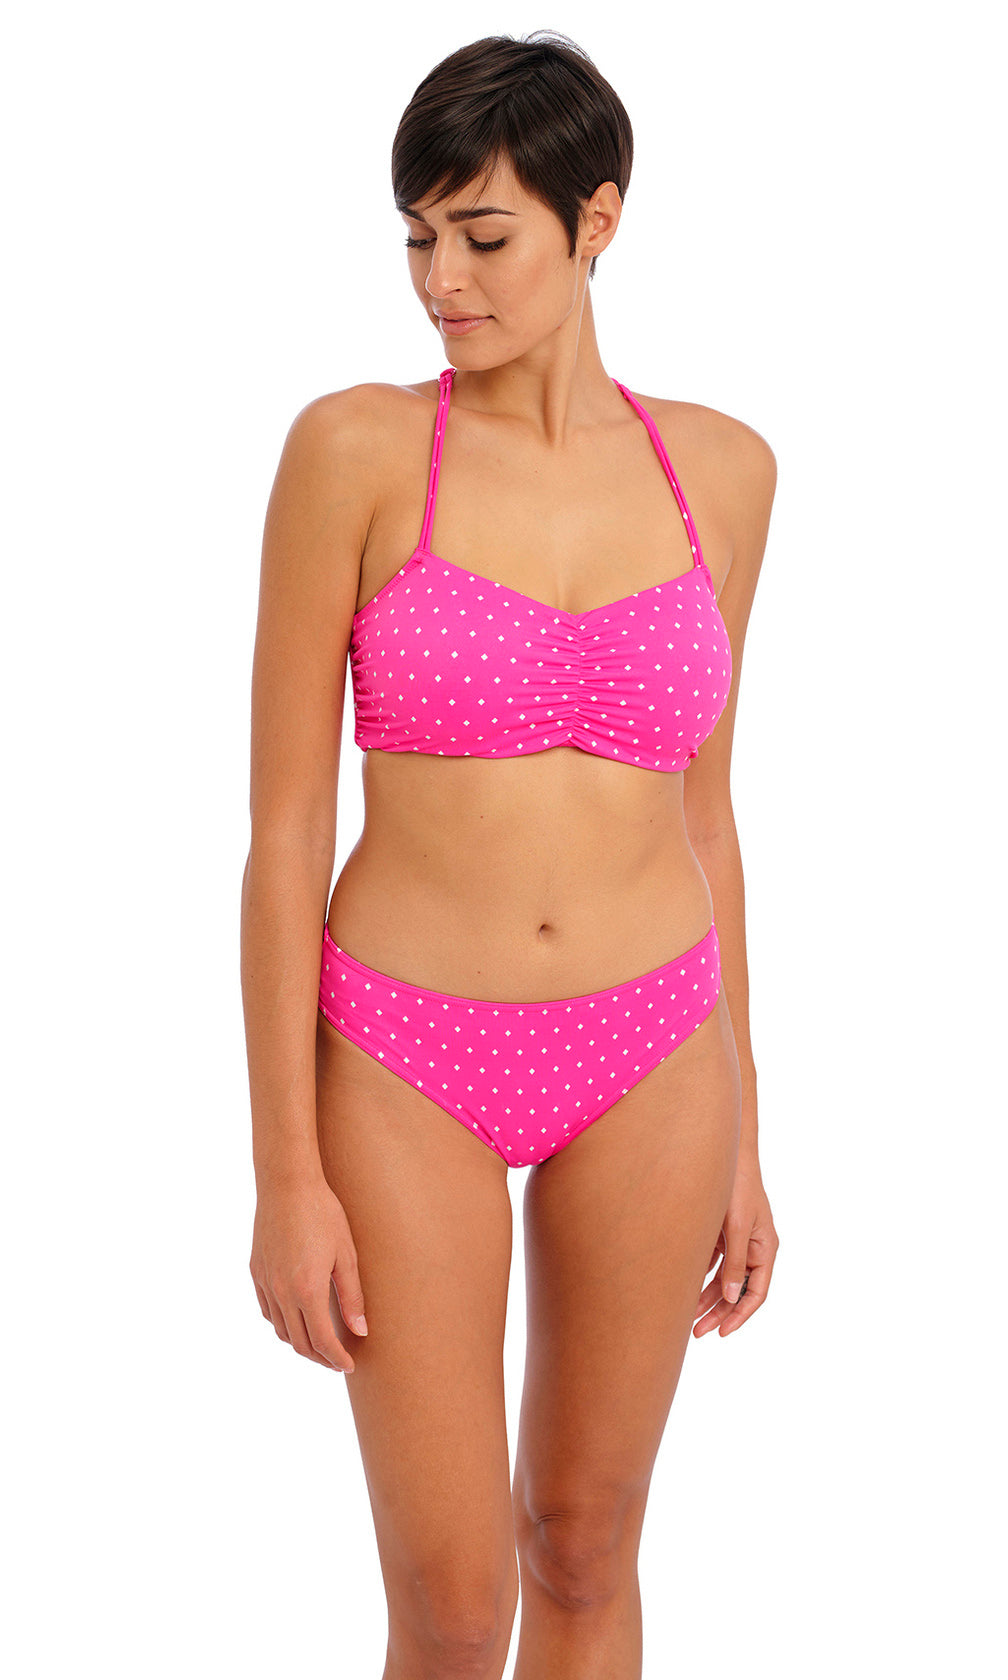 Jewel Cove Raspberry UW Bralette Bikini Top, Special Order D Cup to G Cup